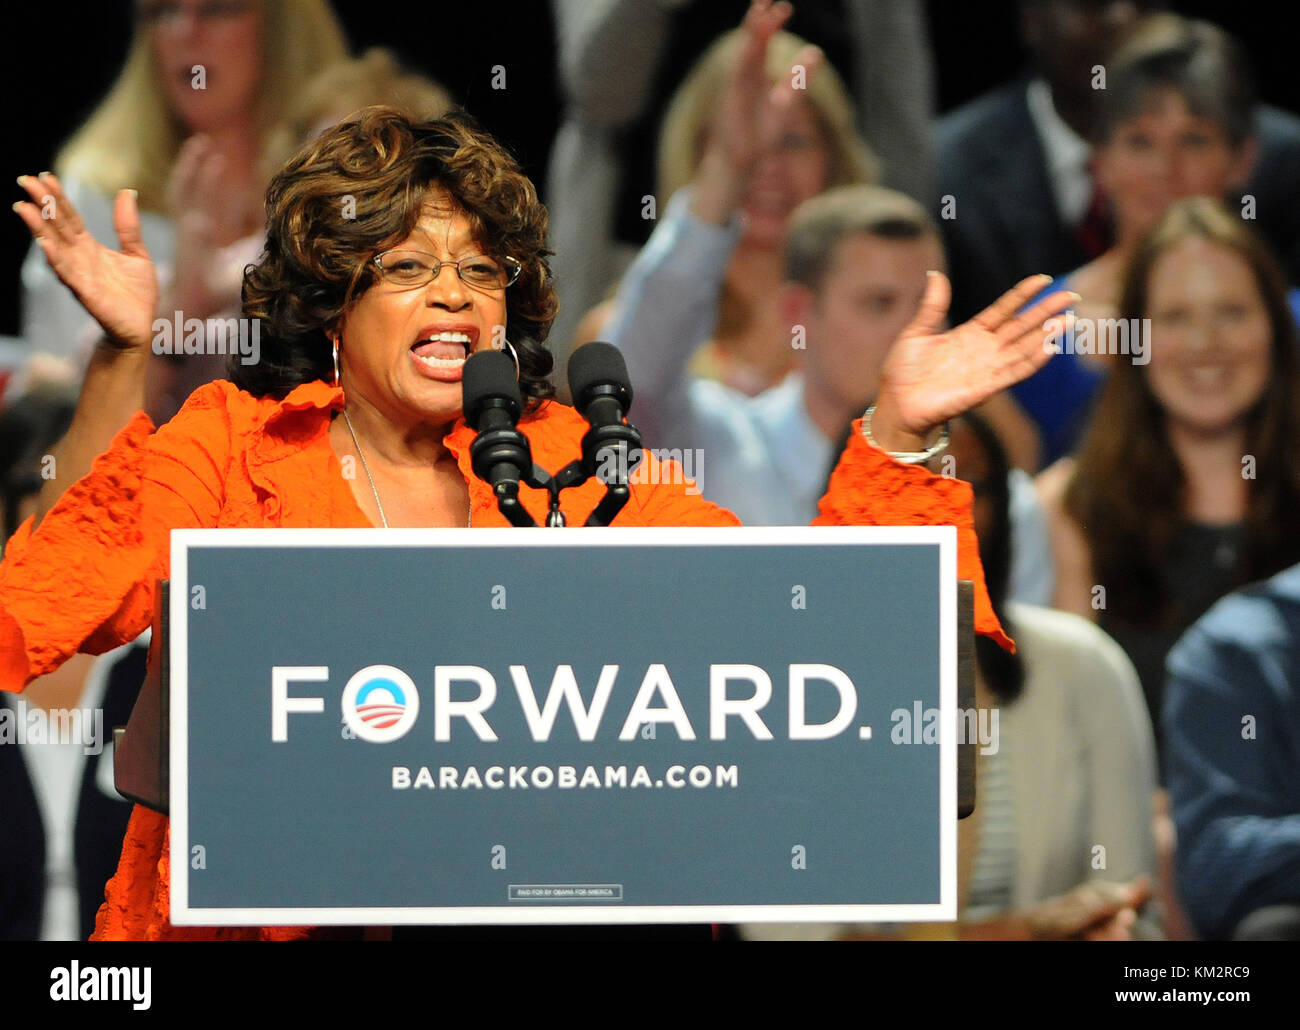 4th Dec, 2017. FILE: July 19, 2012 - Jacksonville, Florida, USA - Former U.S. Rep. Corrine Brown (D-FL) speaks at a re-election campaign rally for former U.S. President Barack Obama on July 19, 2012 in Jacksonville, Florida. On December 4, 2017, Brown was sentenced in federal court in Jacksonville to five years in prison for 18 felony convictions of fraud and tax crimes involving a fake education charity. Brown was also ordered to forfeit more than $650,000 to the U.S. government and pay more than $500,000 in restitution to victims. Credit: Paul Hennessy/Alamy Live News Stock Photo